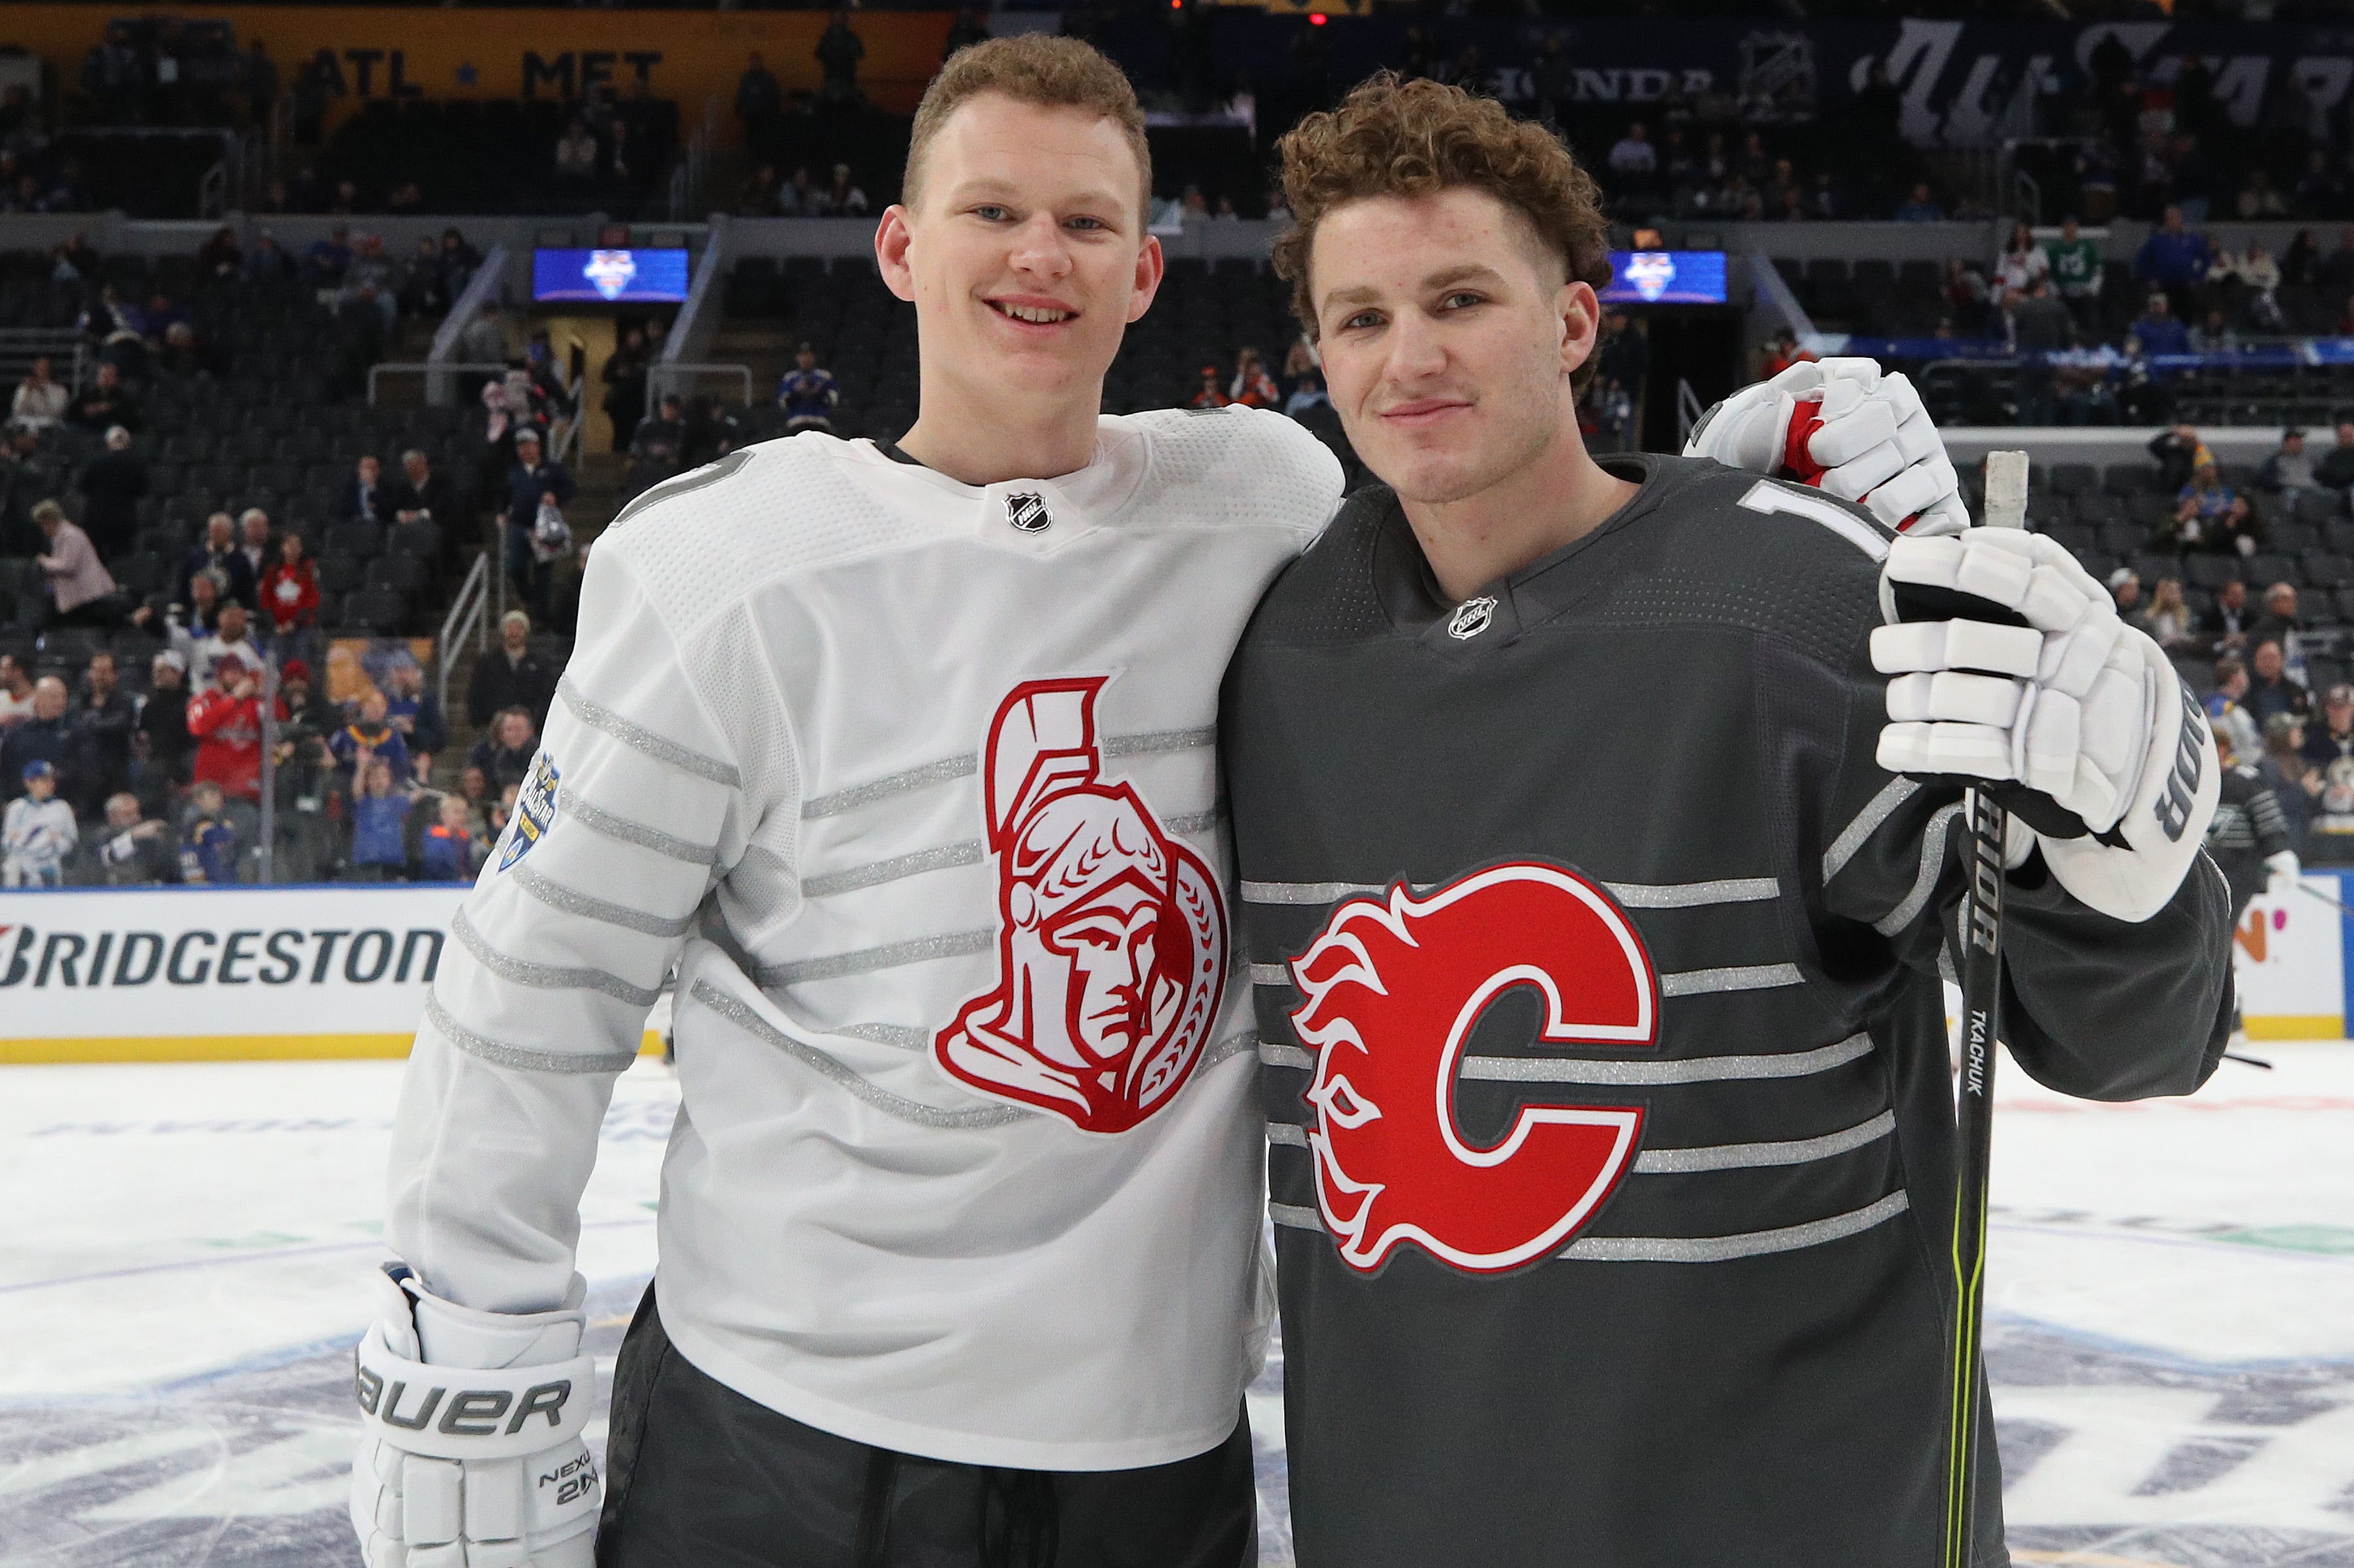 brothers in the nhl today